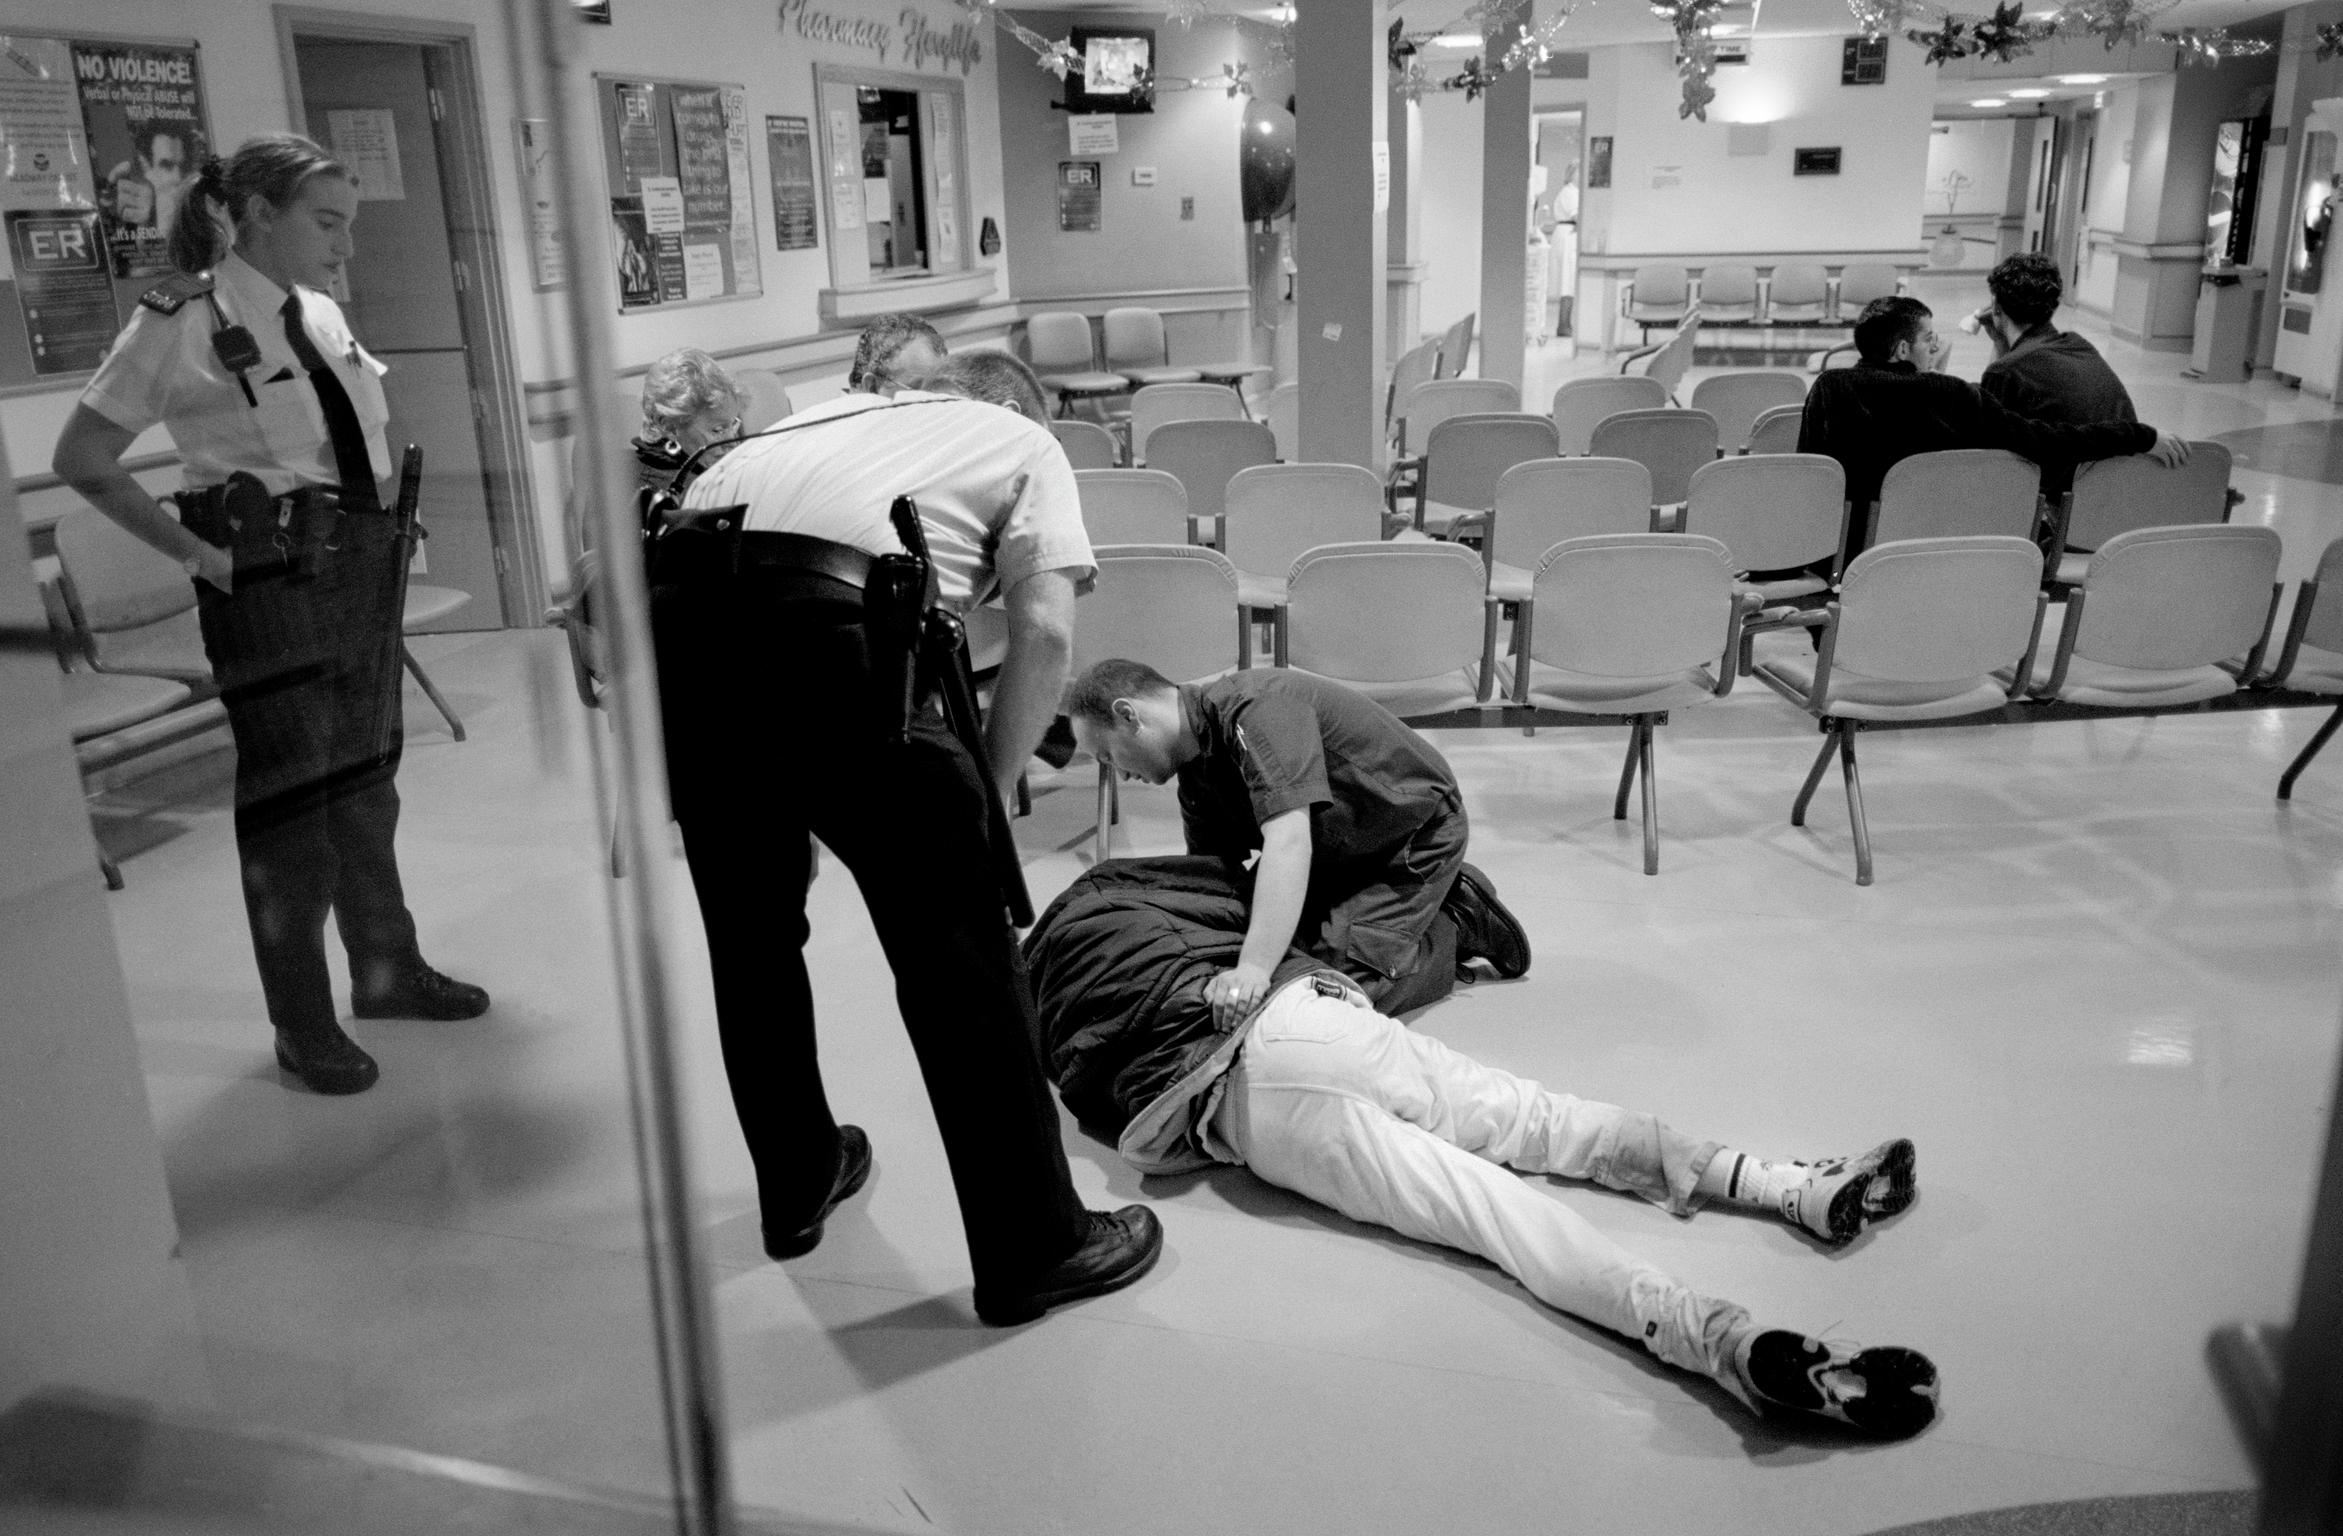 Emergency accident area, University Hospital. A violent patient, very much the worse for drink, collapses in the waiting area and the police are called. Cardiff, Wales